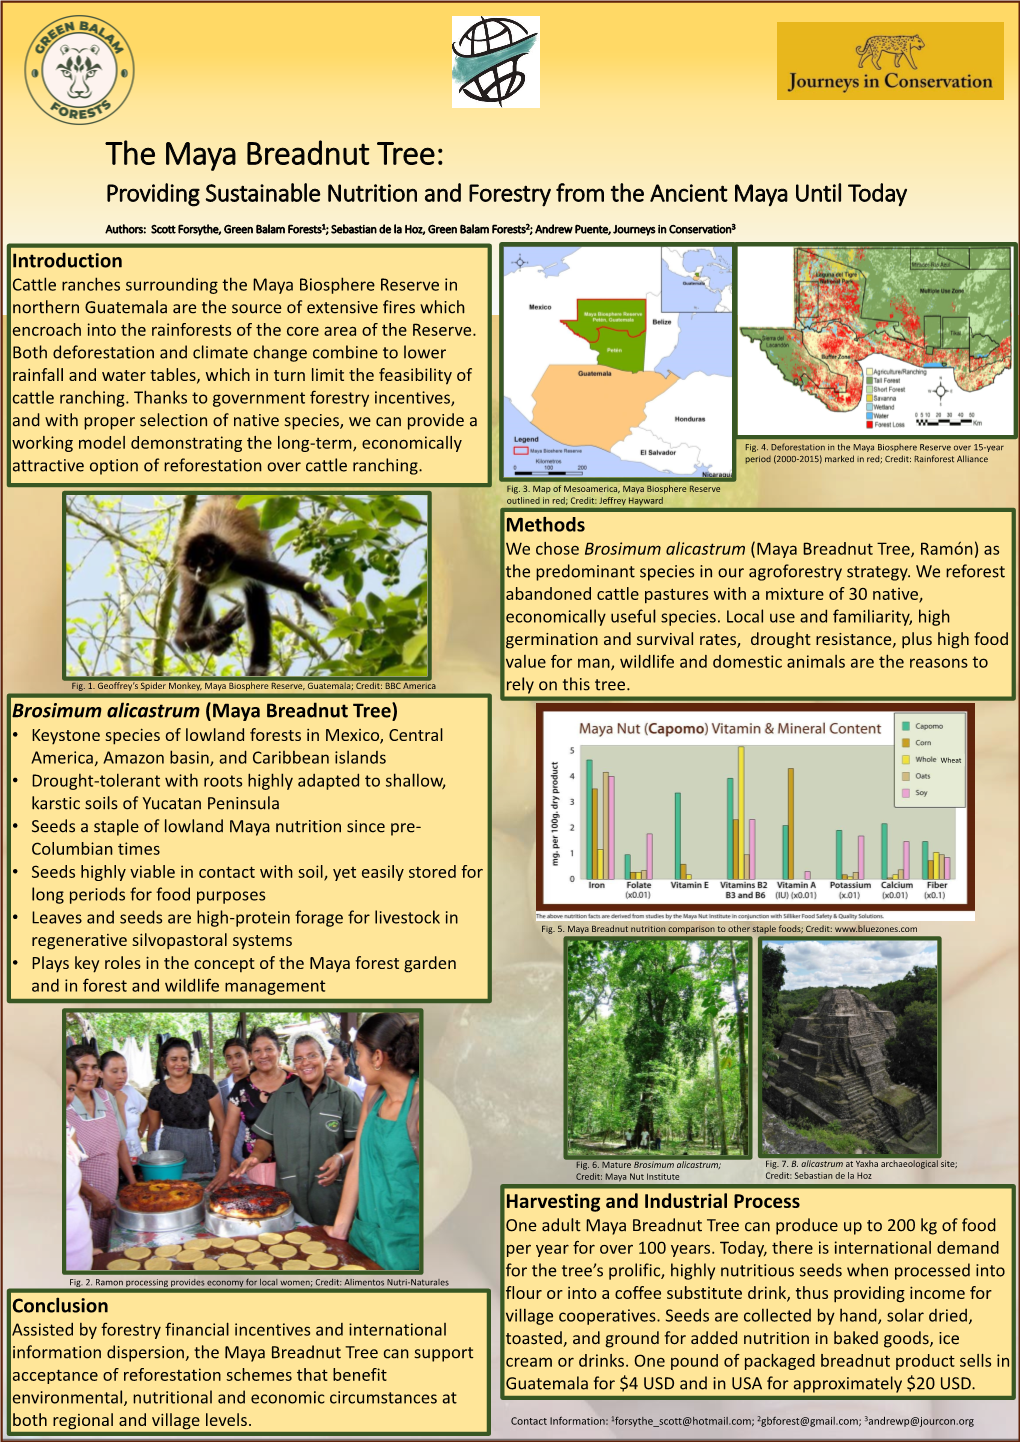 The Maya Breadnut Tree: Providing Sustainable Nutrition and Forestry from the Ancient Maya Until Today